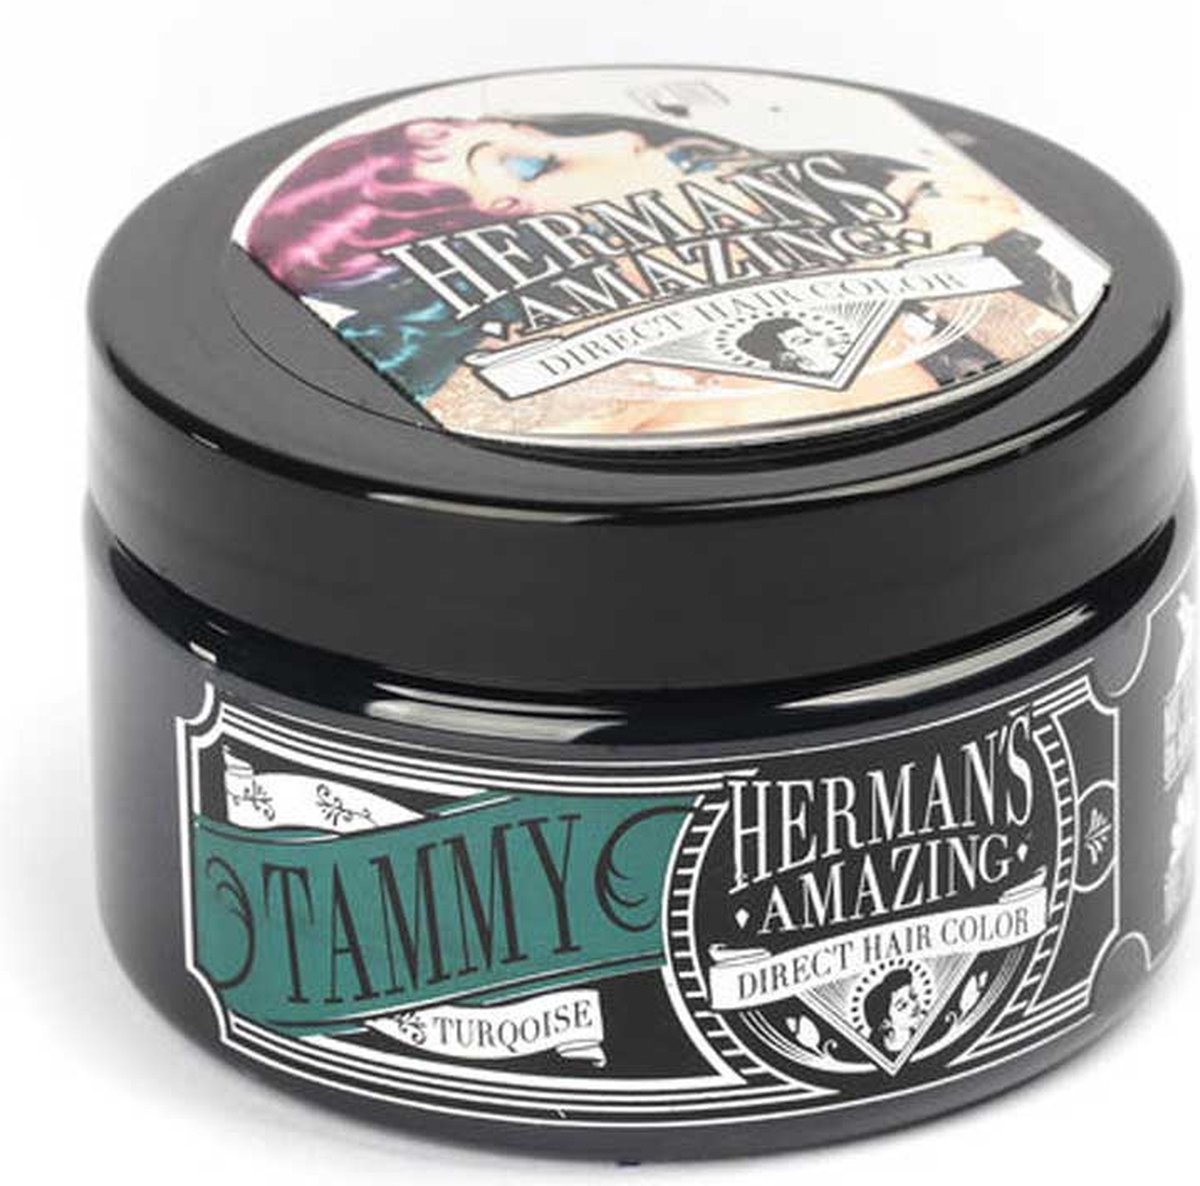 Hermans Amazing Haircolor - Tammy Turquoise Semi permanente haarverf - Turquoise